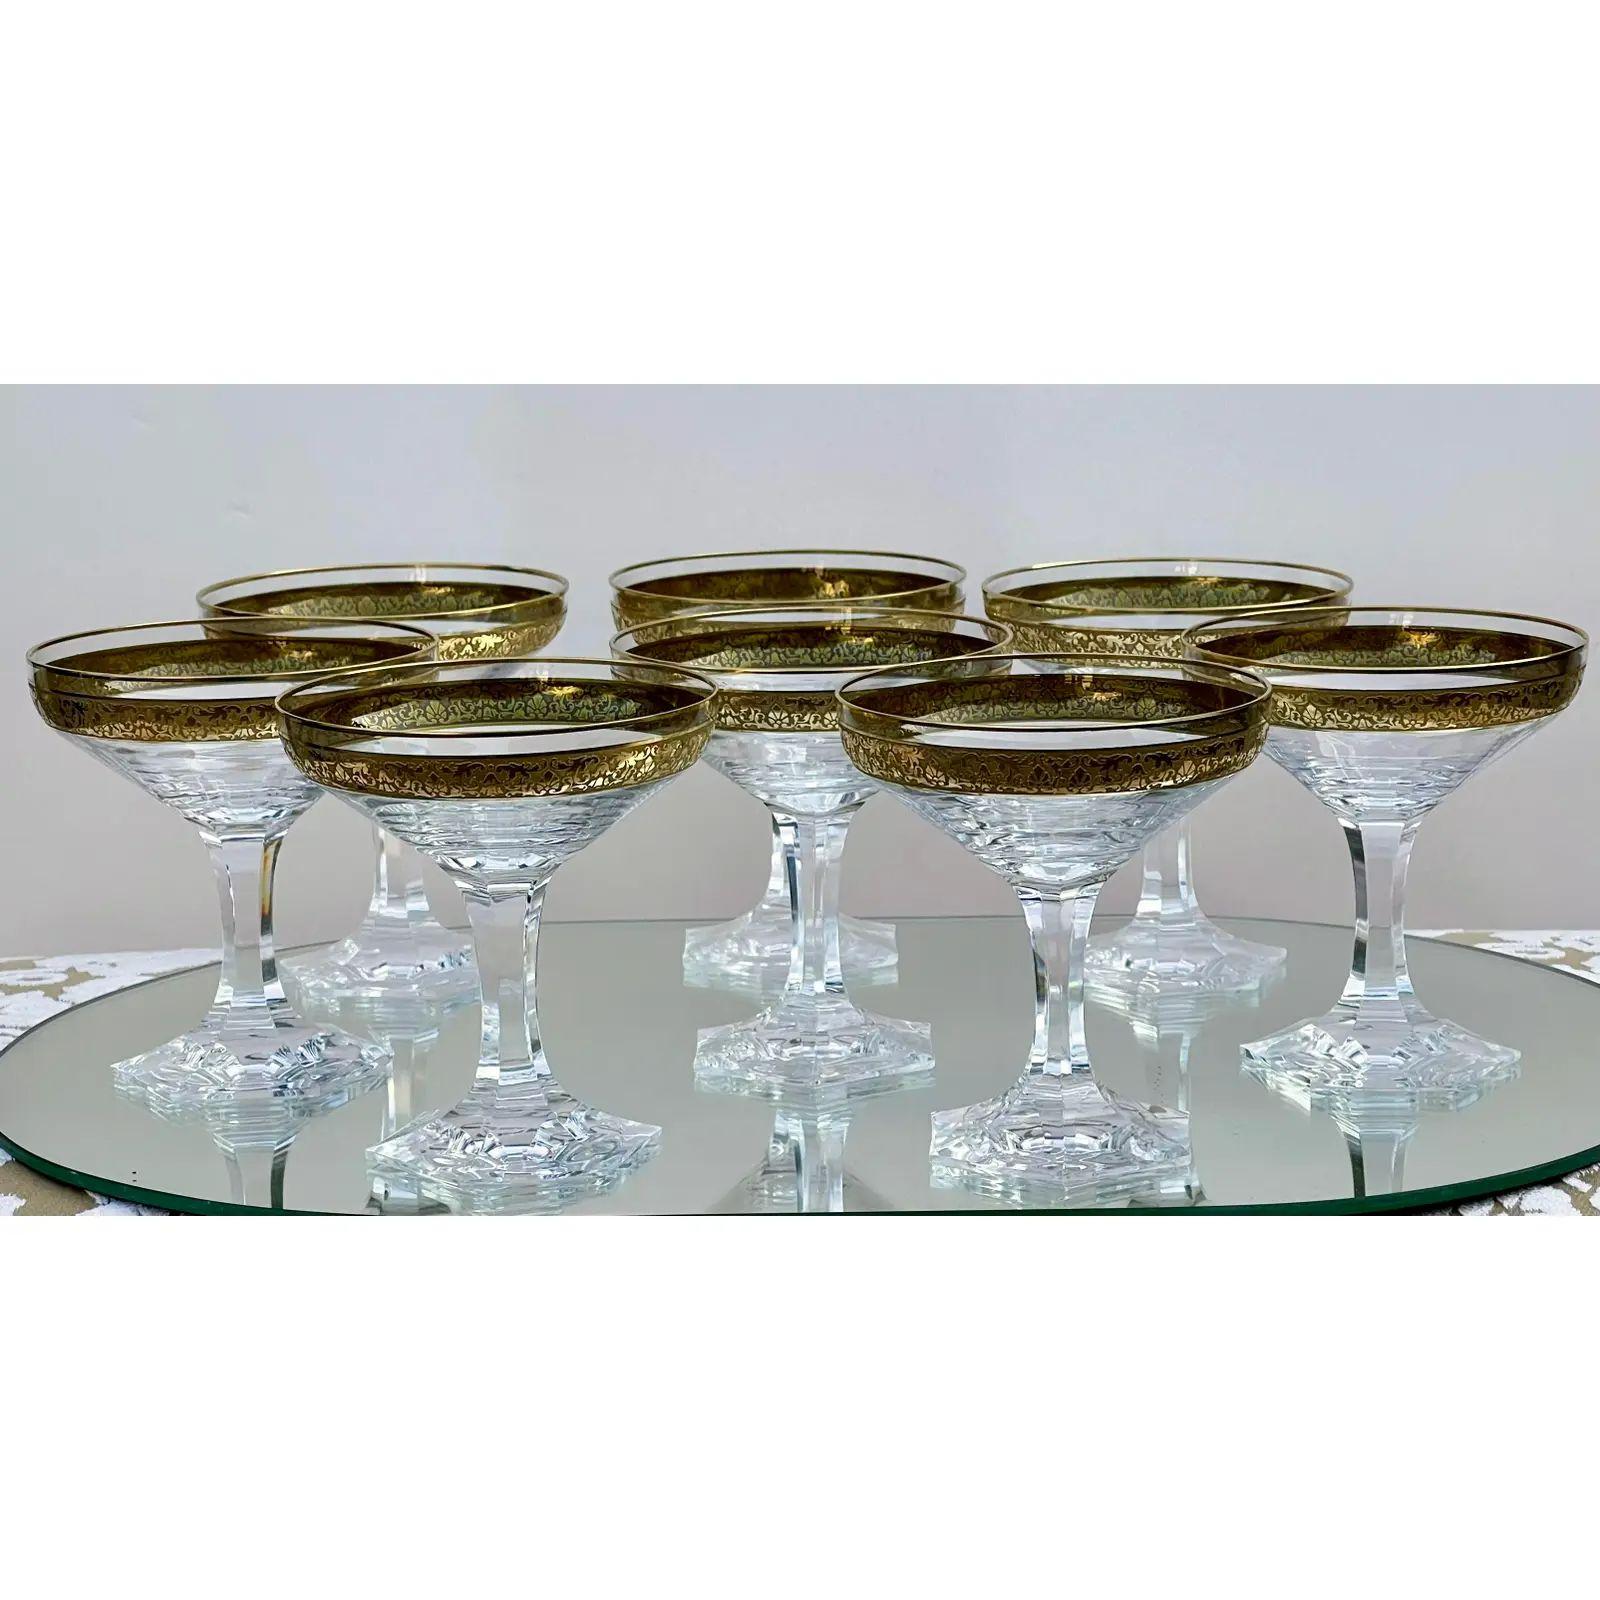 20th Century Set of 8 Art Deco Moser Gold Encrusted Crystal Champagne Coupe Wine Stems, 1980s